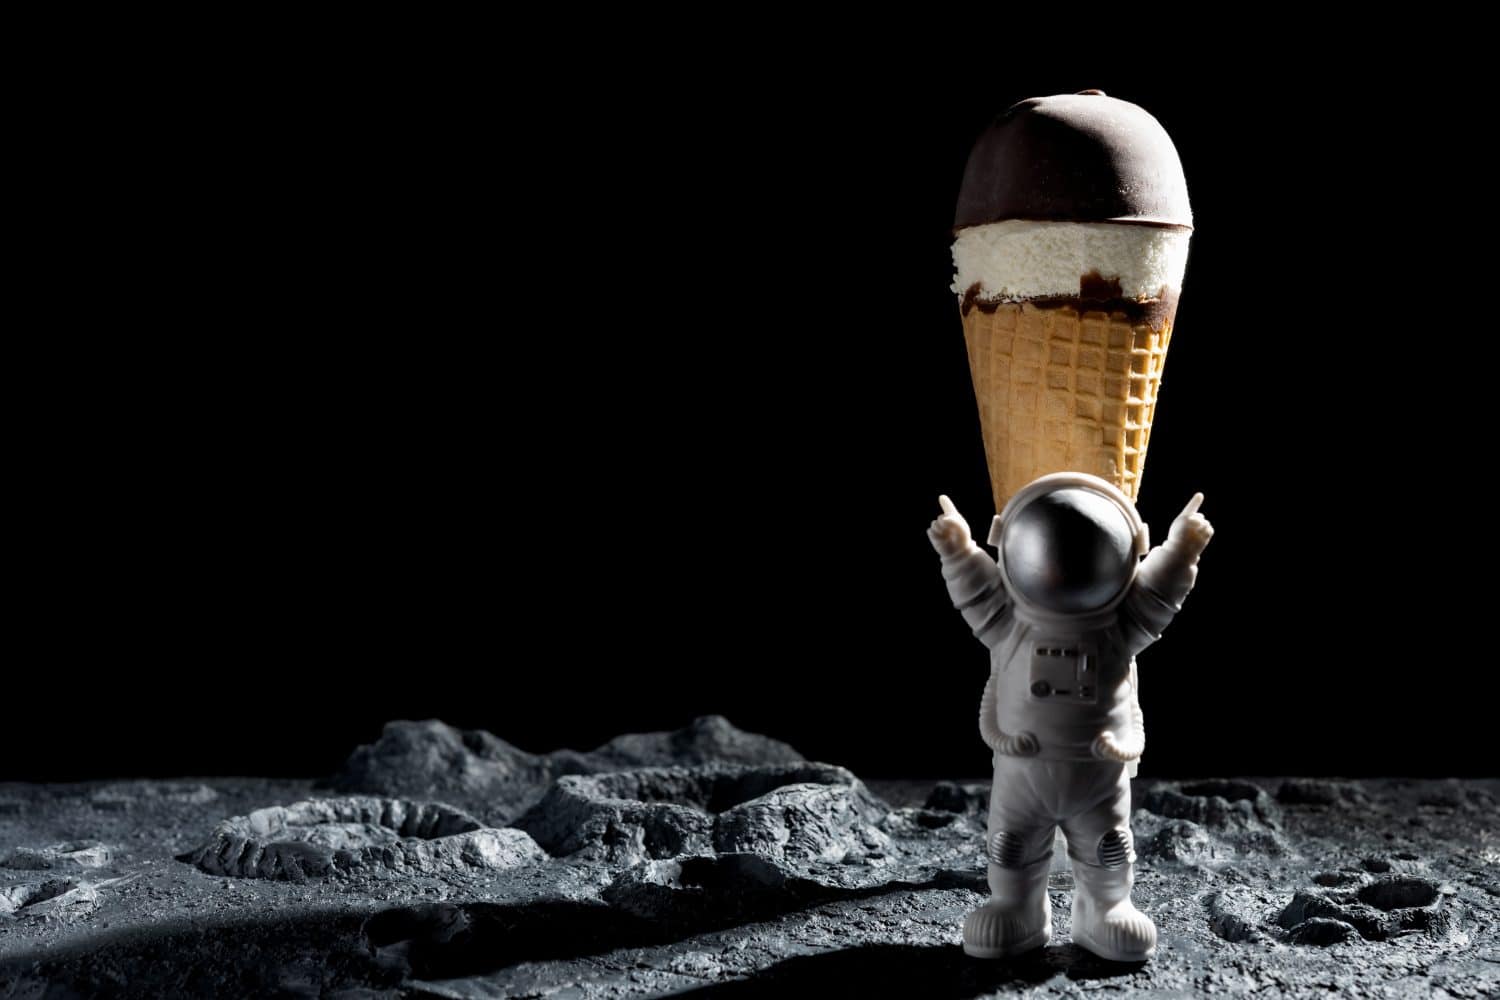 astronaut with a chocolate ice cream cone on a rough surface with craters